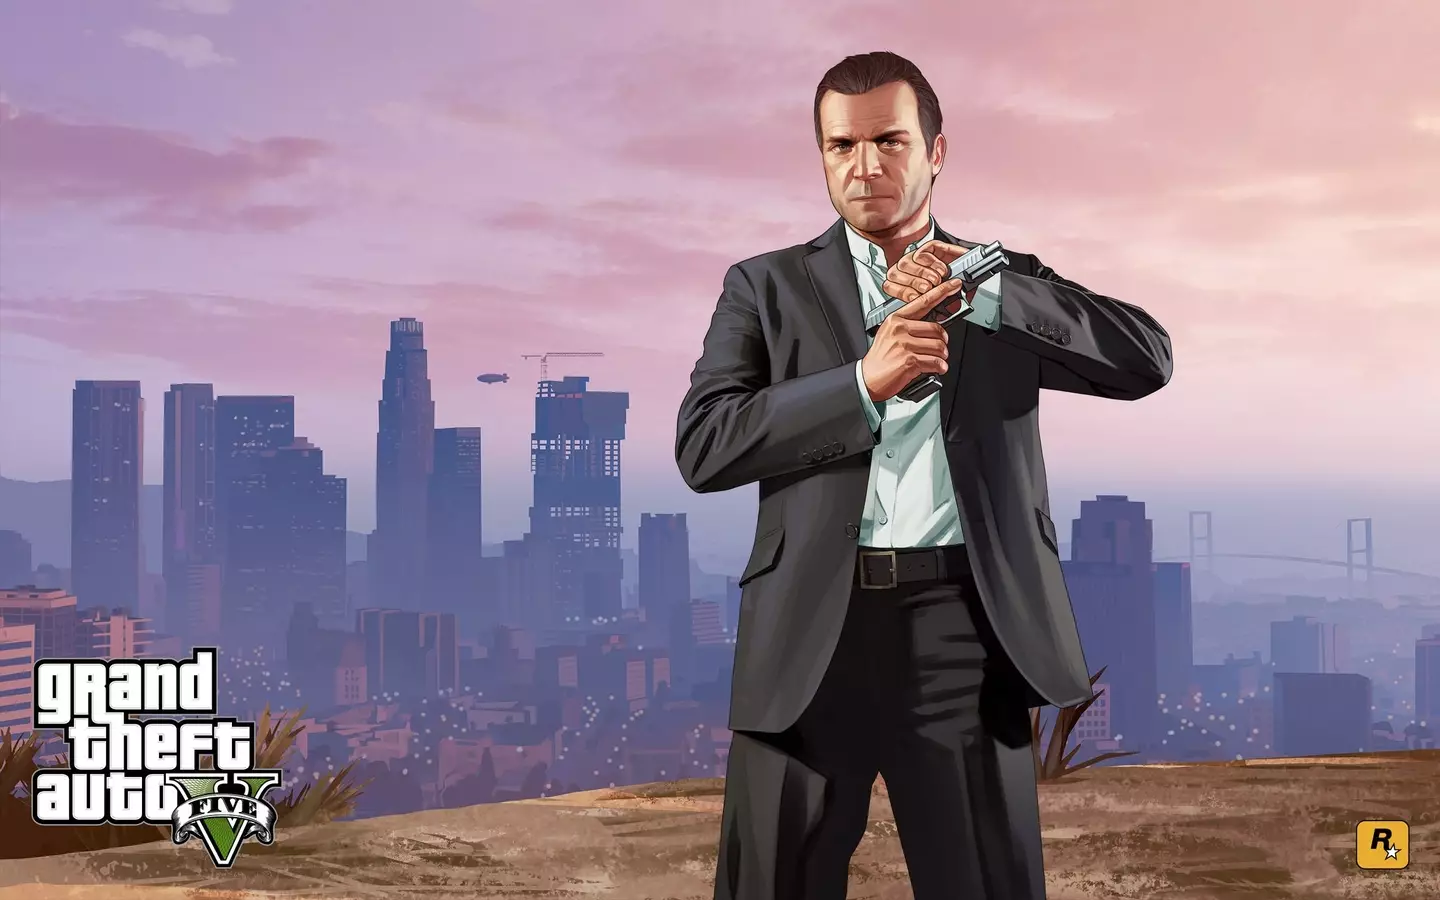 GTA V is the second highest-selling games of all time.